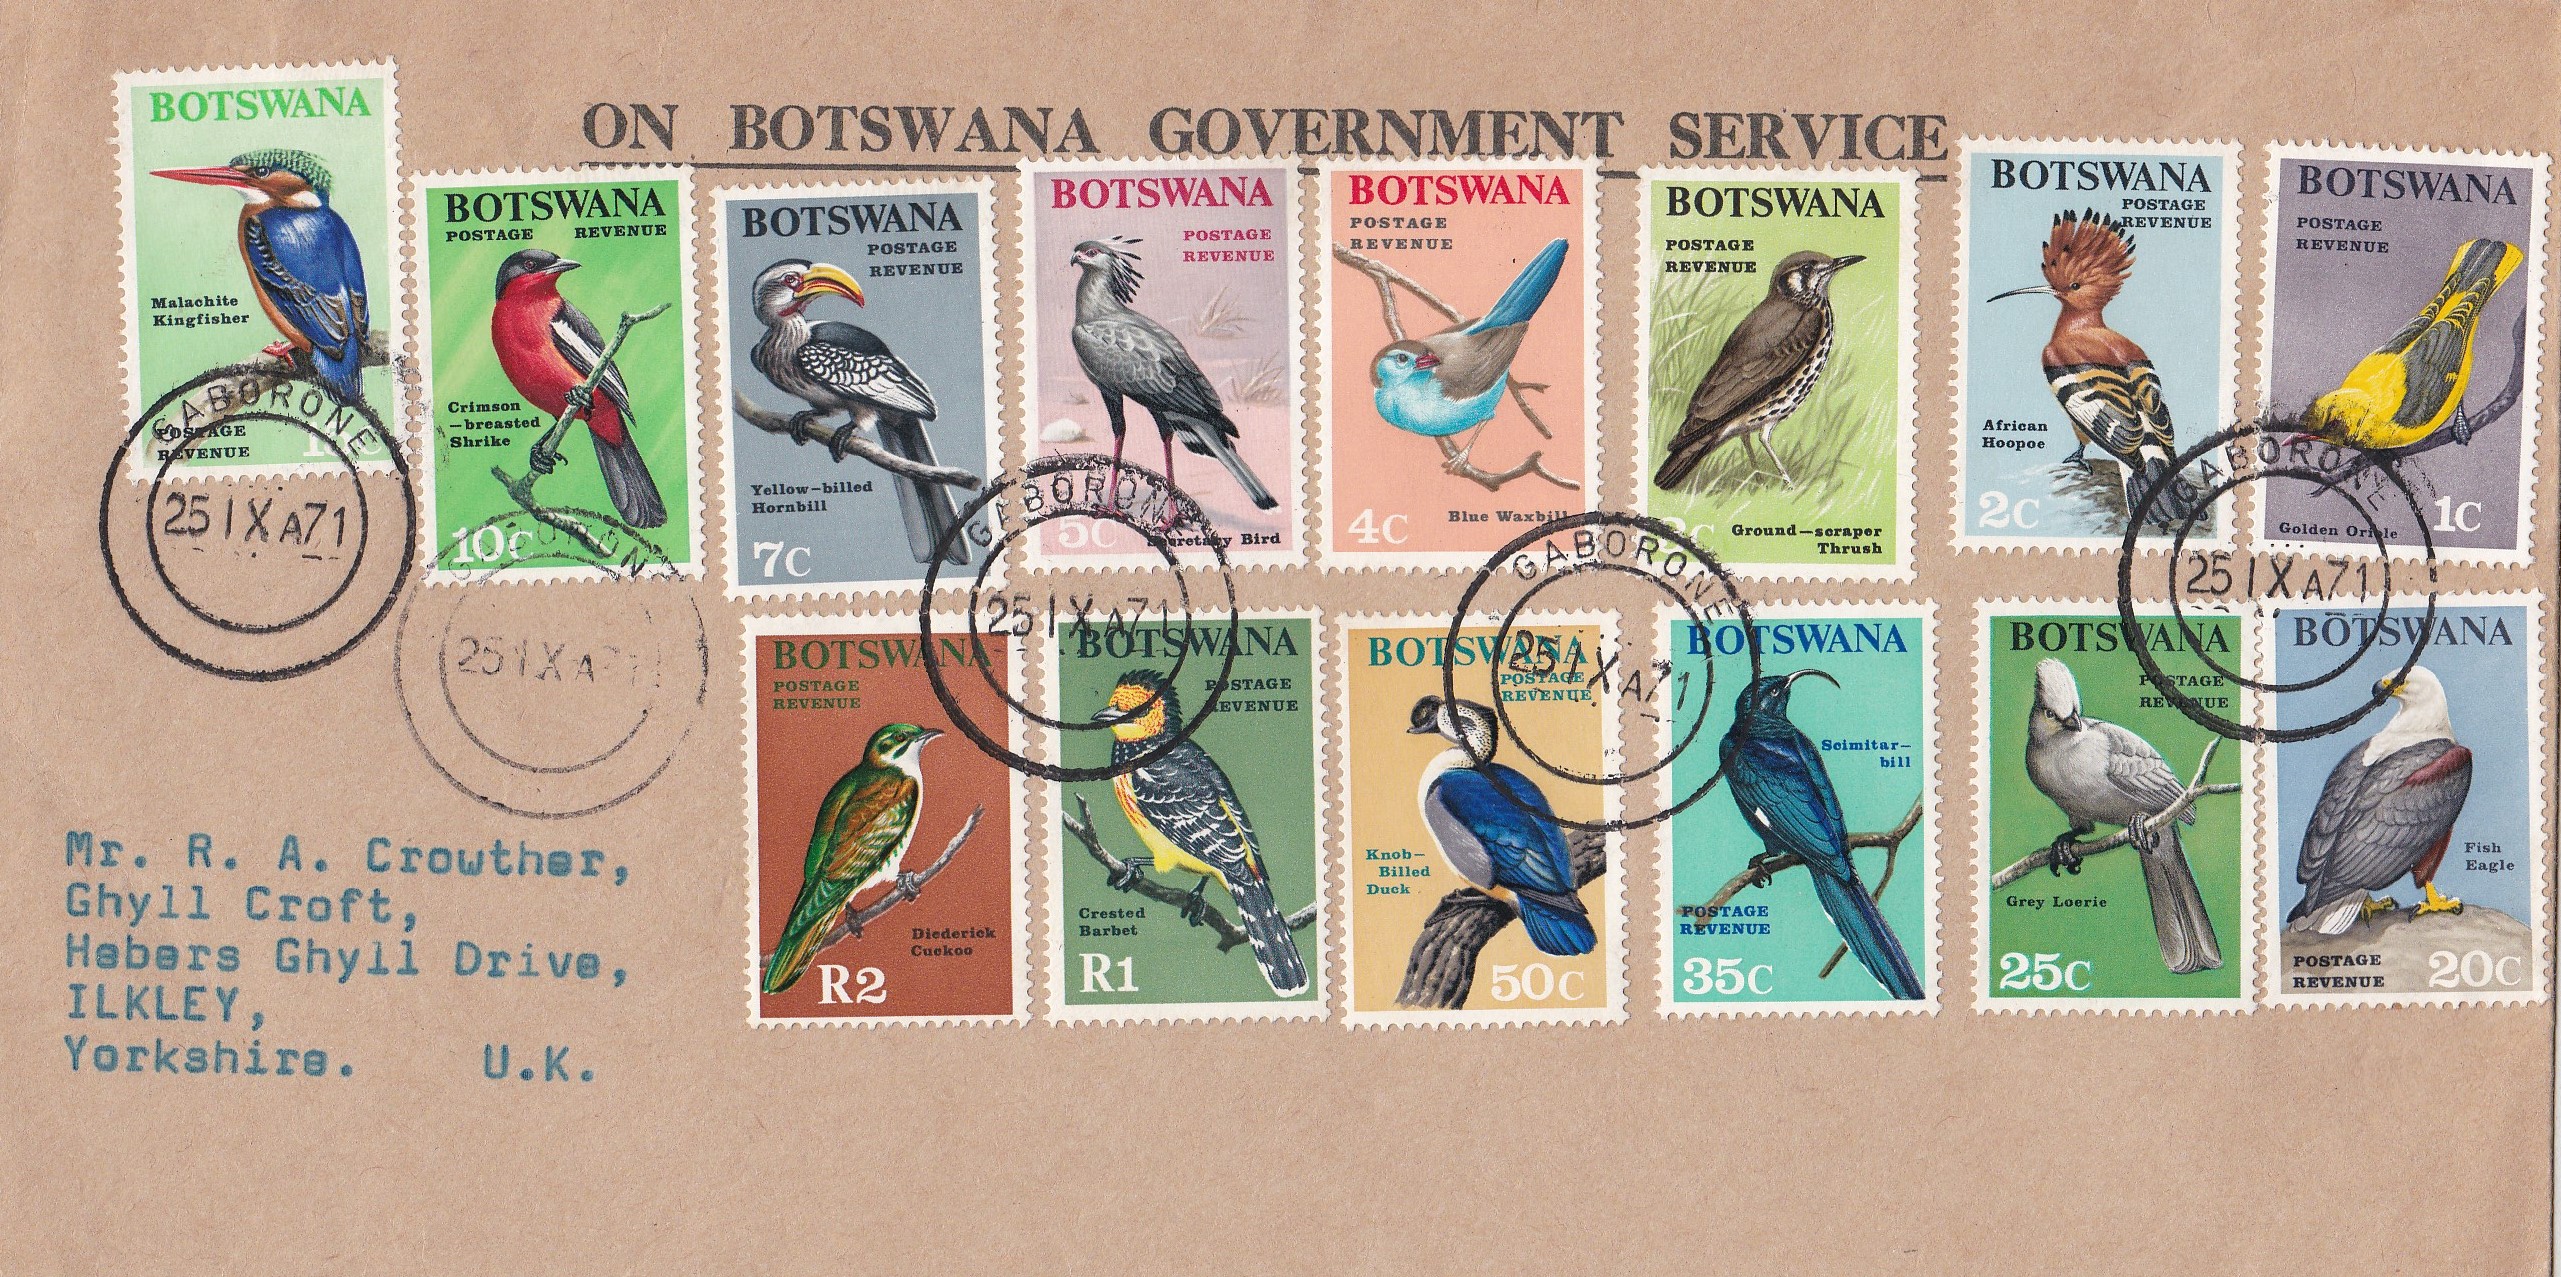 Botswana - 1971 (25th Nov) Birds set 1 cent to 2R fine used on Botswana Government Service Cover,